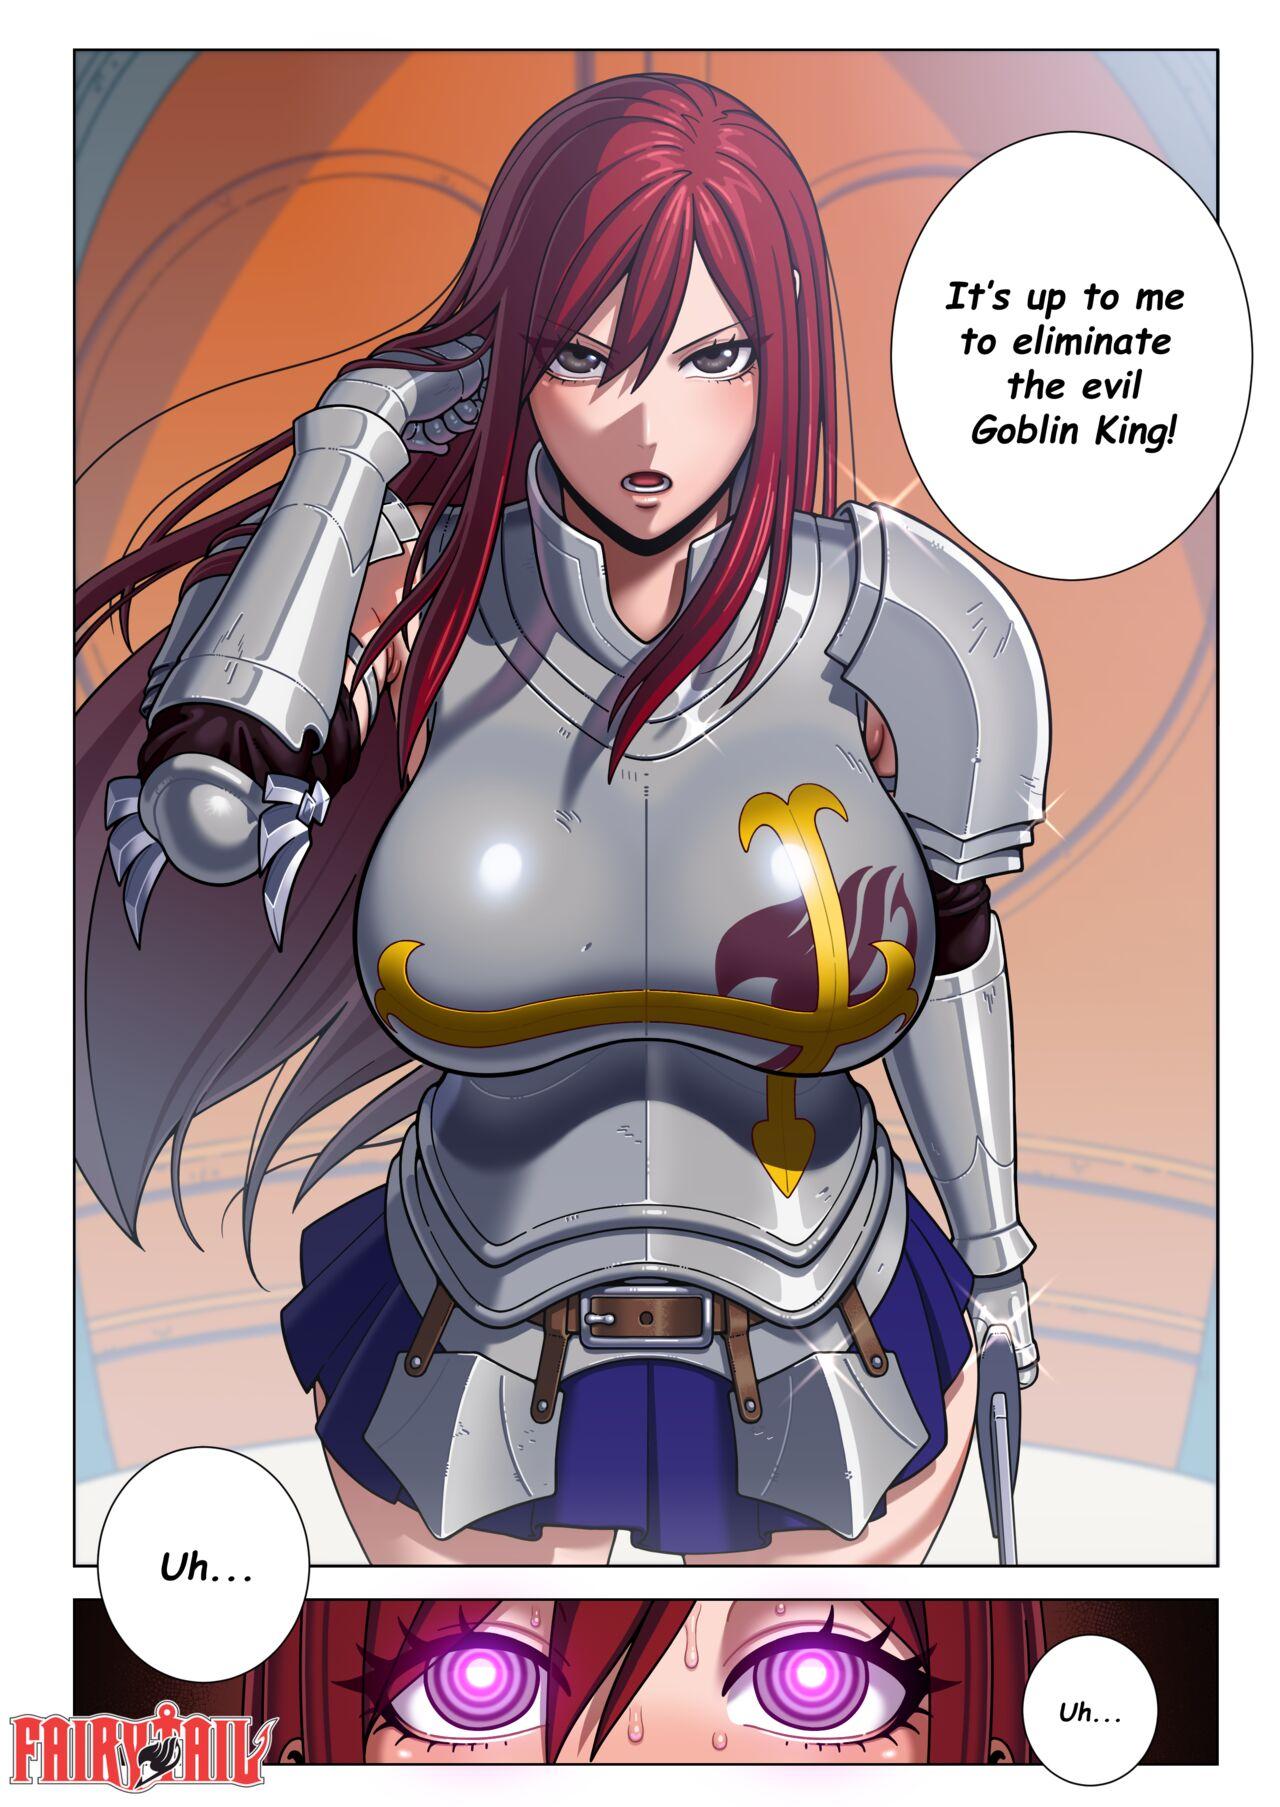 Pounded Erza Scarlet - Fairy tail Cumload - Page 2